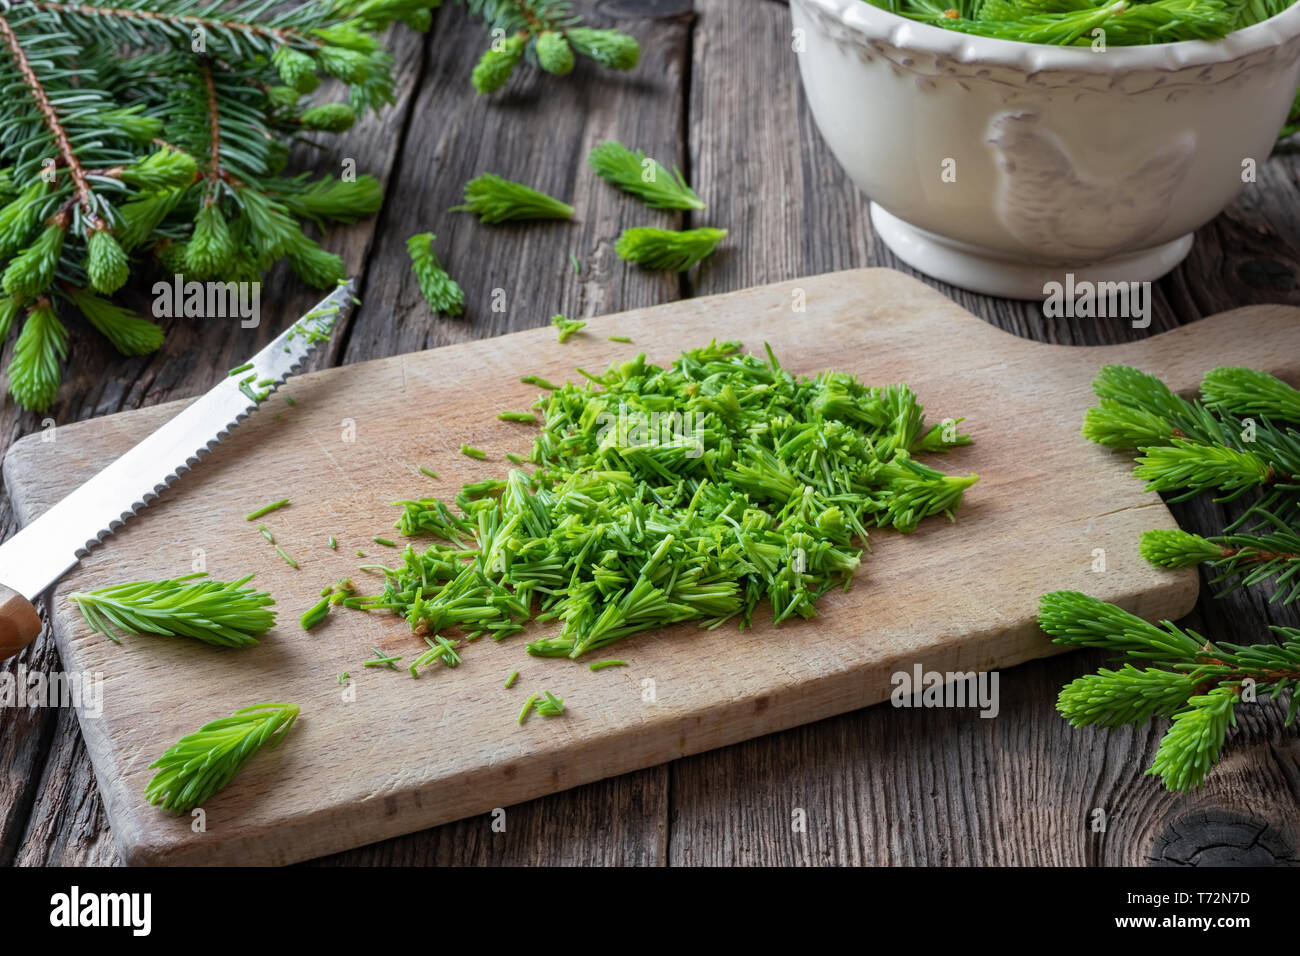 Cutting up young spruce tips to prepare homemade herbal syrup Stock Photo